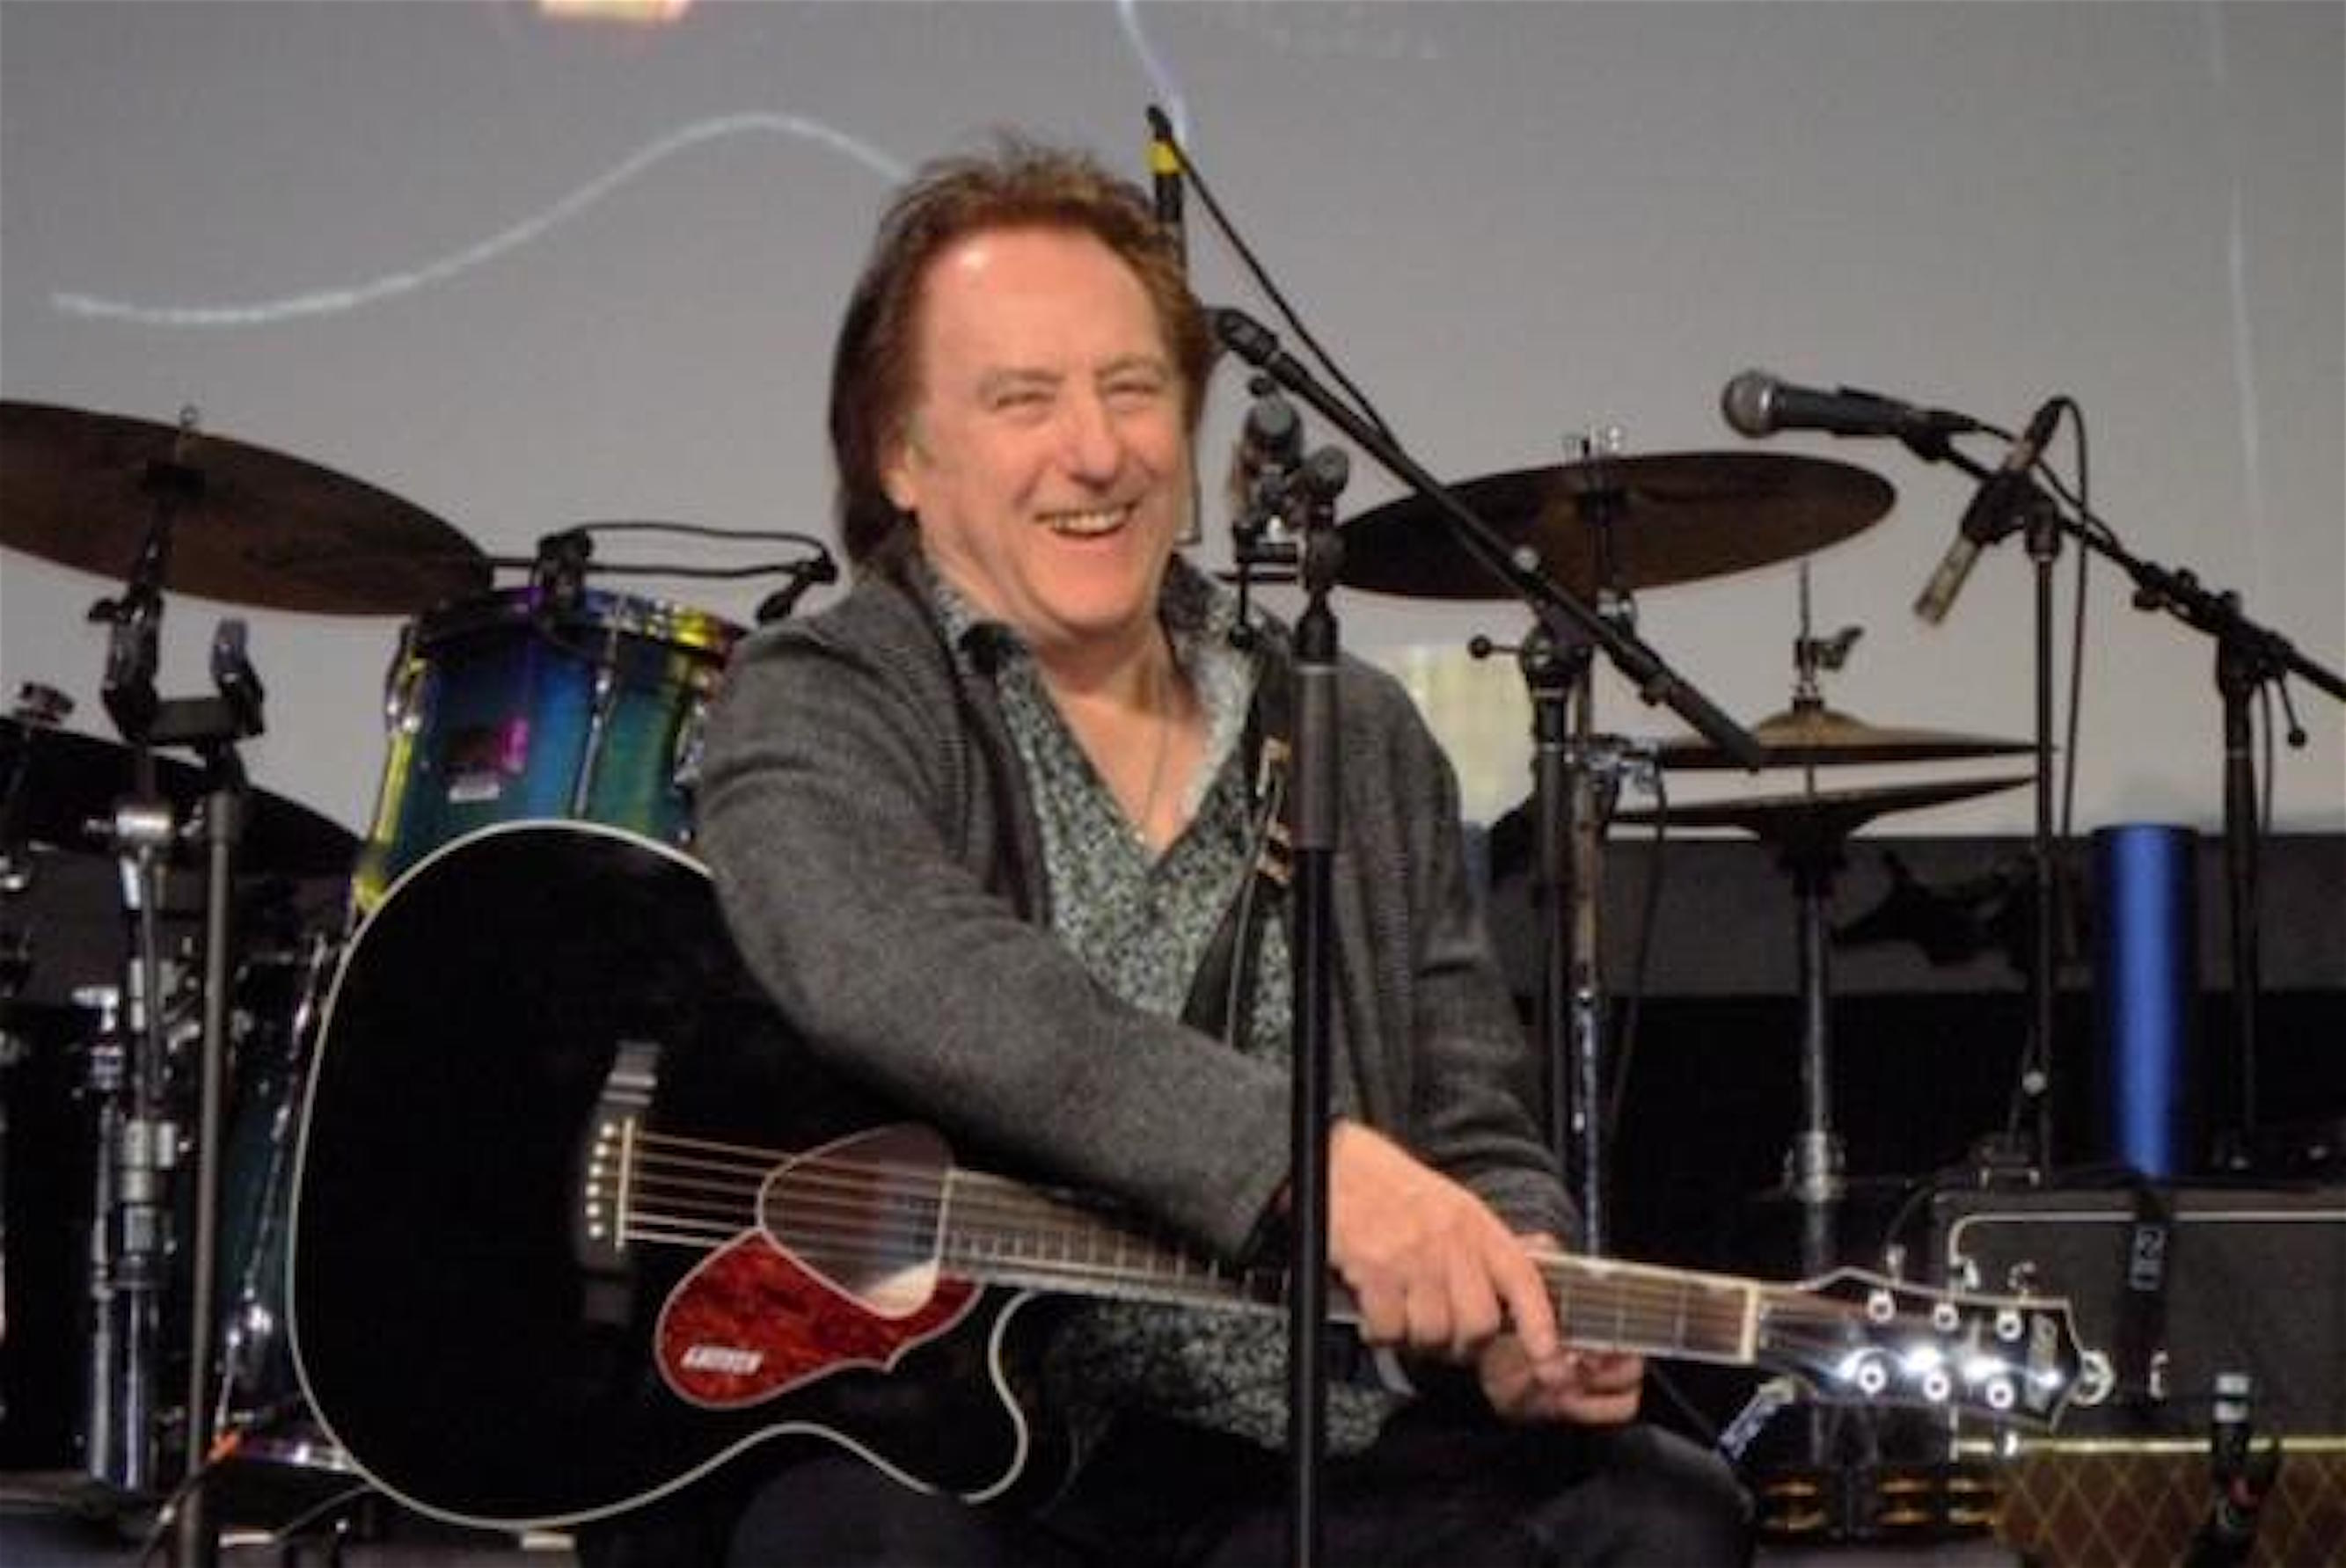 DENNY LAINE ON GIVING FLIGHT TO WINGS, TOURING WITH GINGER BAKER AND THE MOODY BLUES’ HALL OF FAME INDUCTION